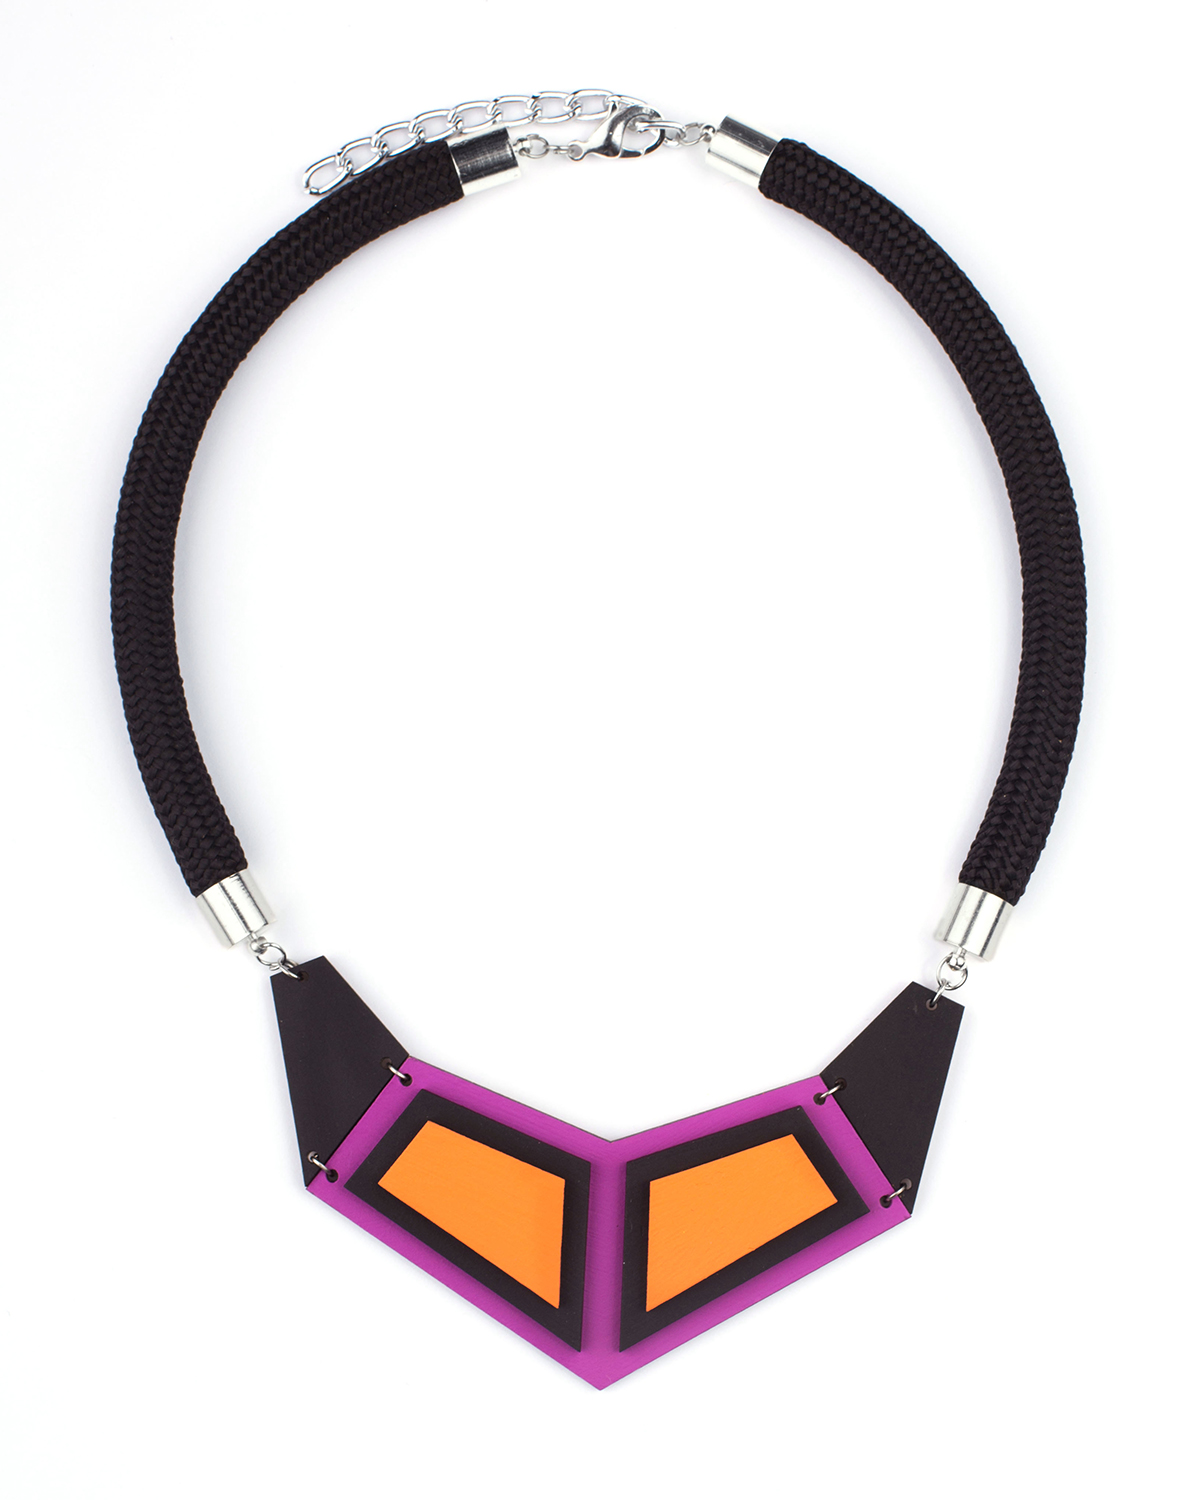 Popout necklace | Lasercut jewelry | Rename | Made in Belgrade